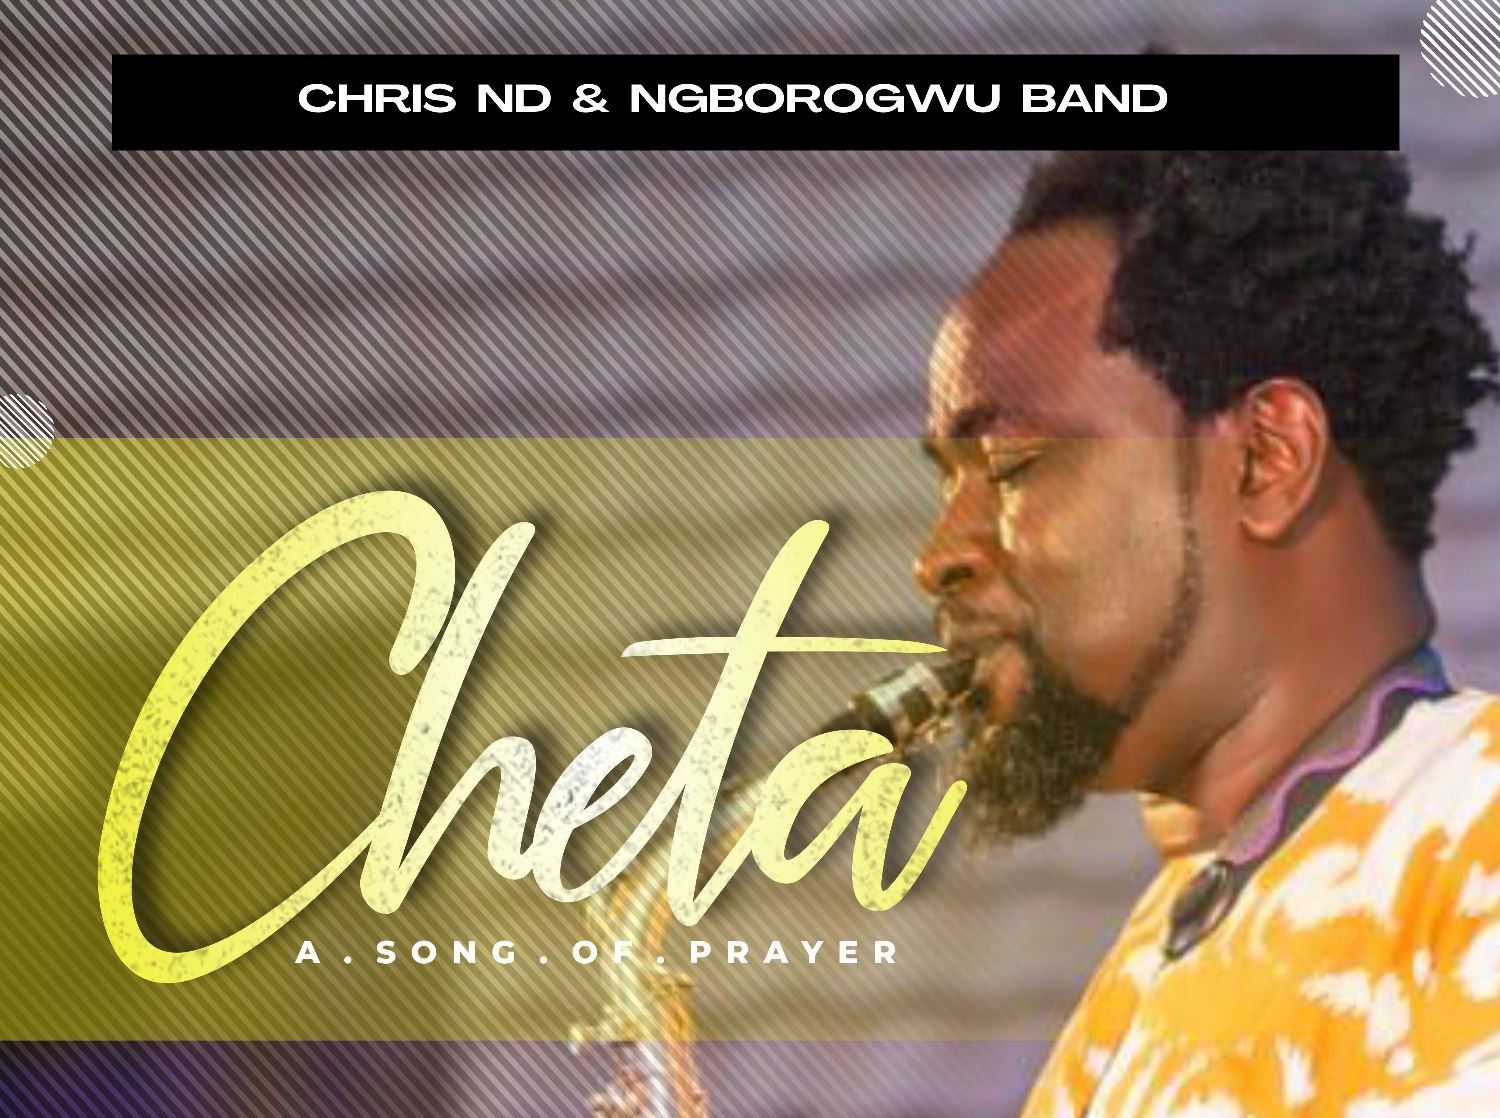 Afrocentric Gospel singer and saxophonist Chris ND drops EP titled CHETA